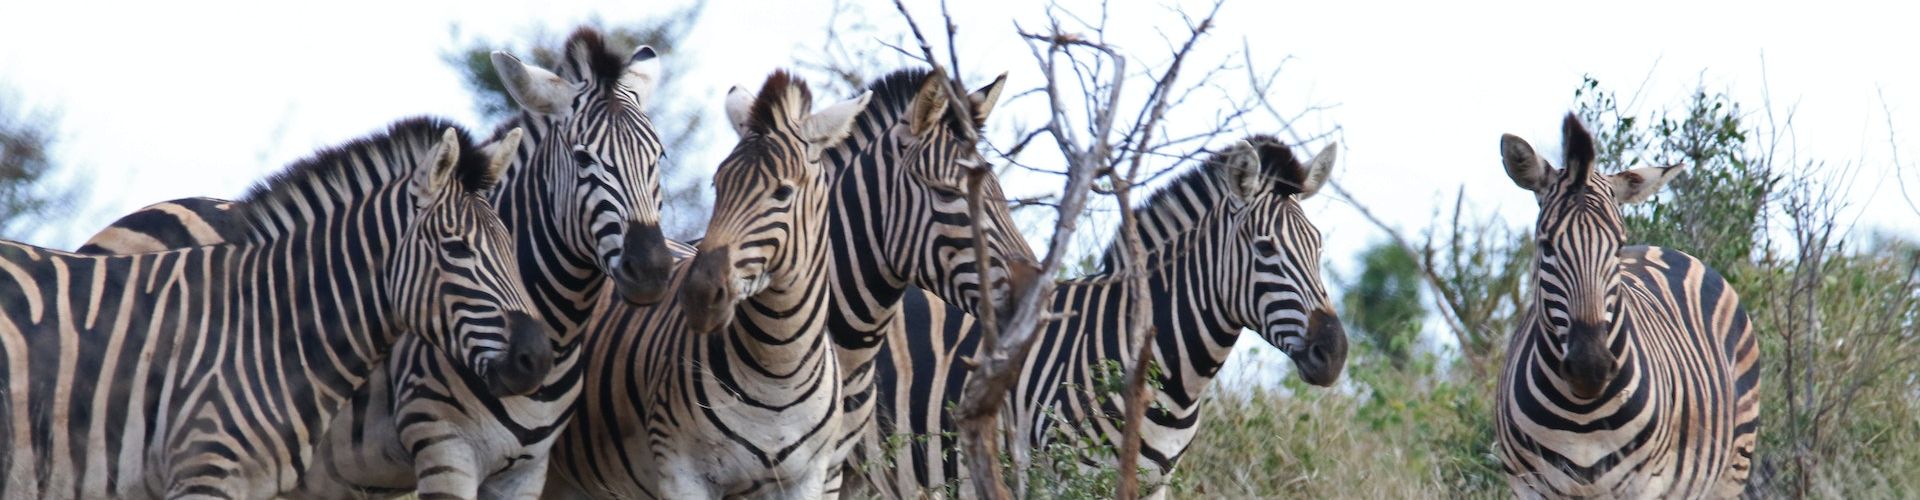 Several Zebras standing close together in a Tanzanian National Park